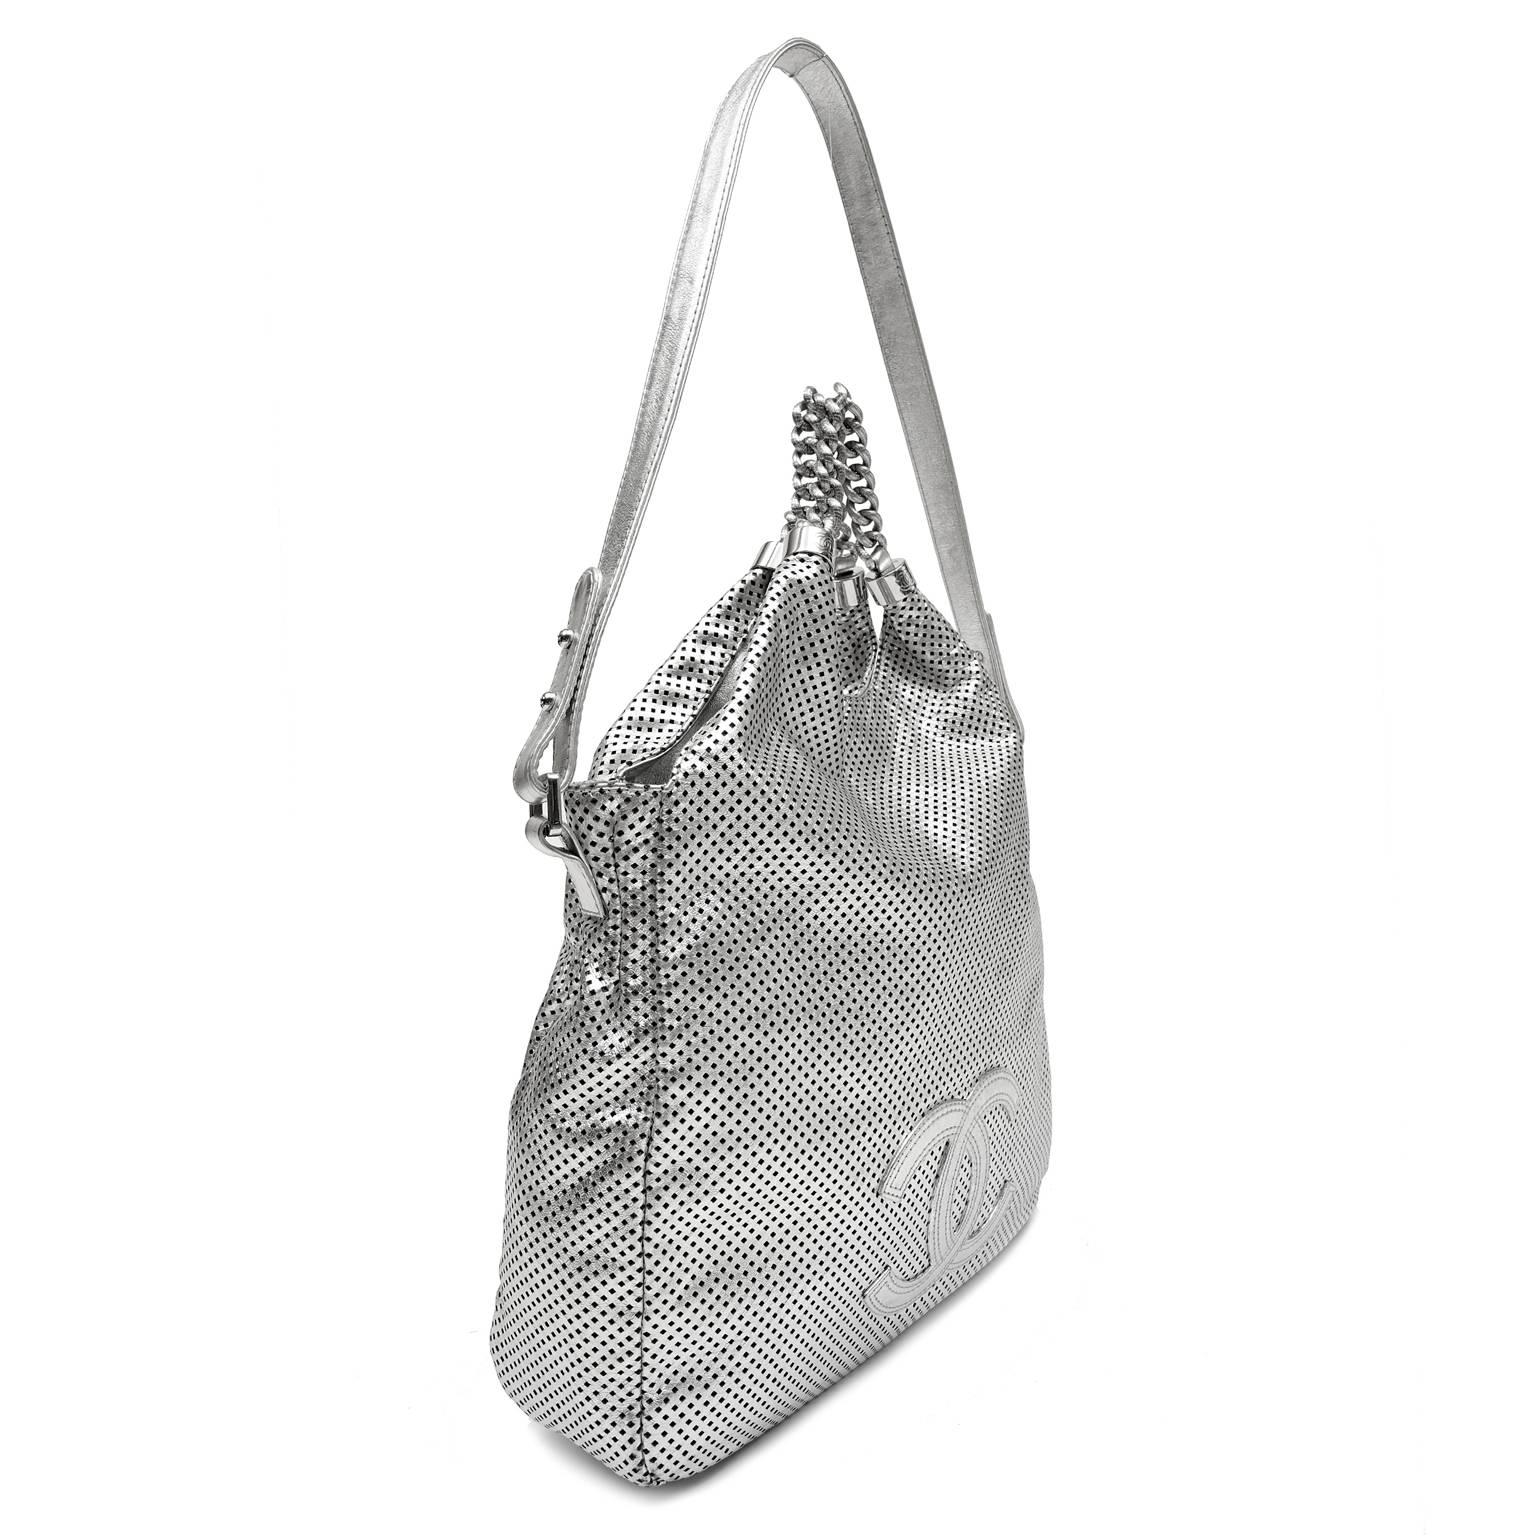 Chanel Metallic Silver Leather Rodeo Drive Hobo- EXCELLENT PLUS 
  A casual every day bag with a carefree vibe, it is a must have for warm weather vacations and summer holidays.  
Metallic silver leather hobo is perforated throughout and accented